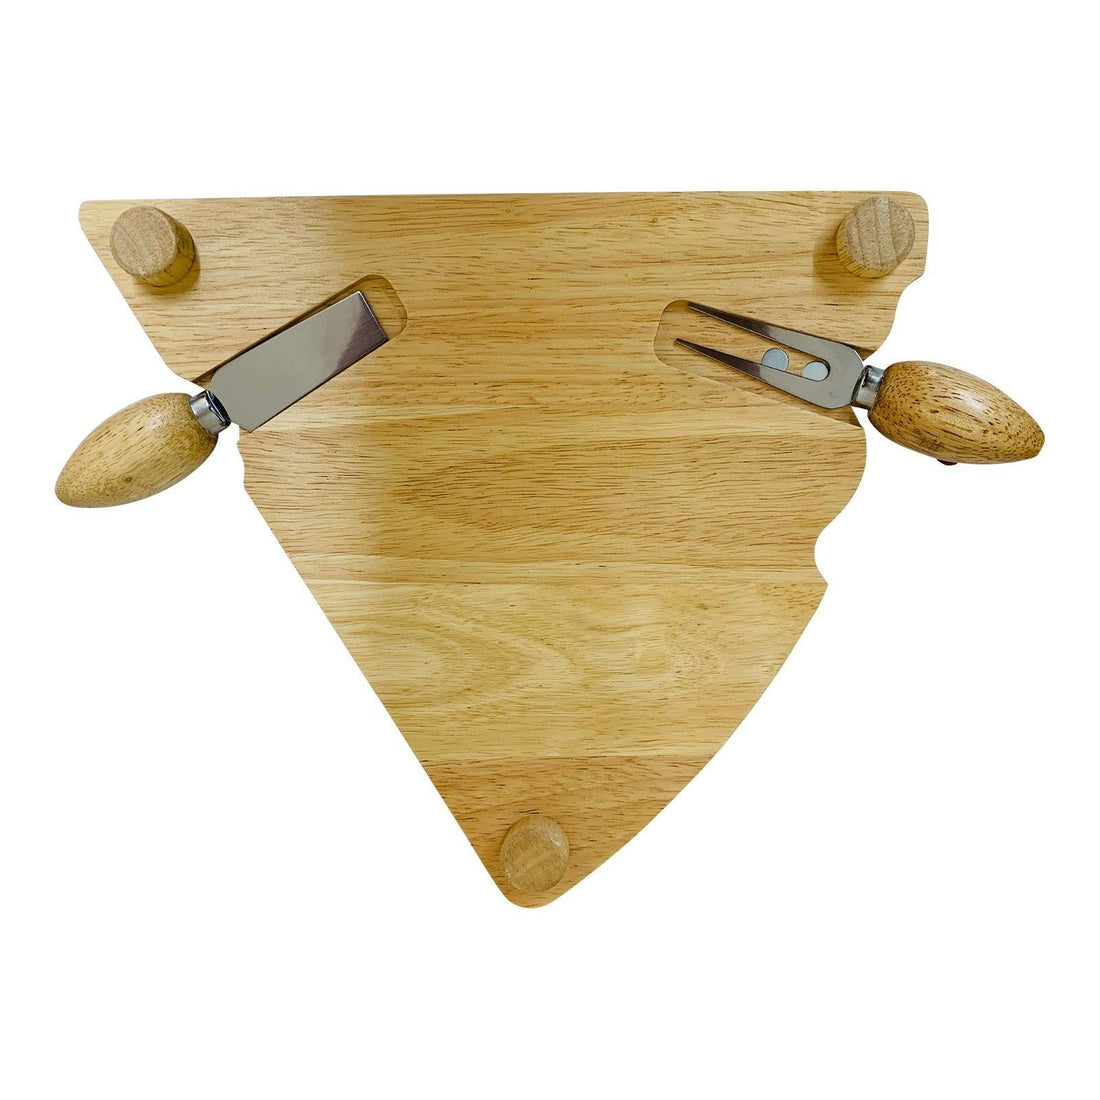 Cheeseboard Wedge Shape with Mouse Knives - £41.99 - Kitchen Storage 